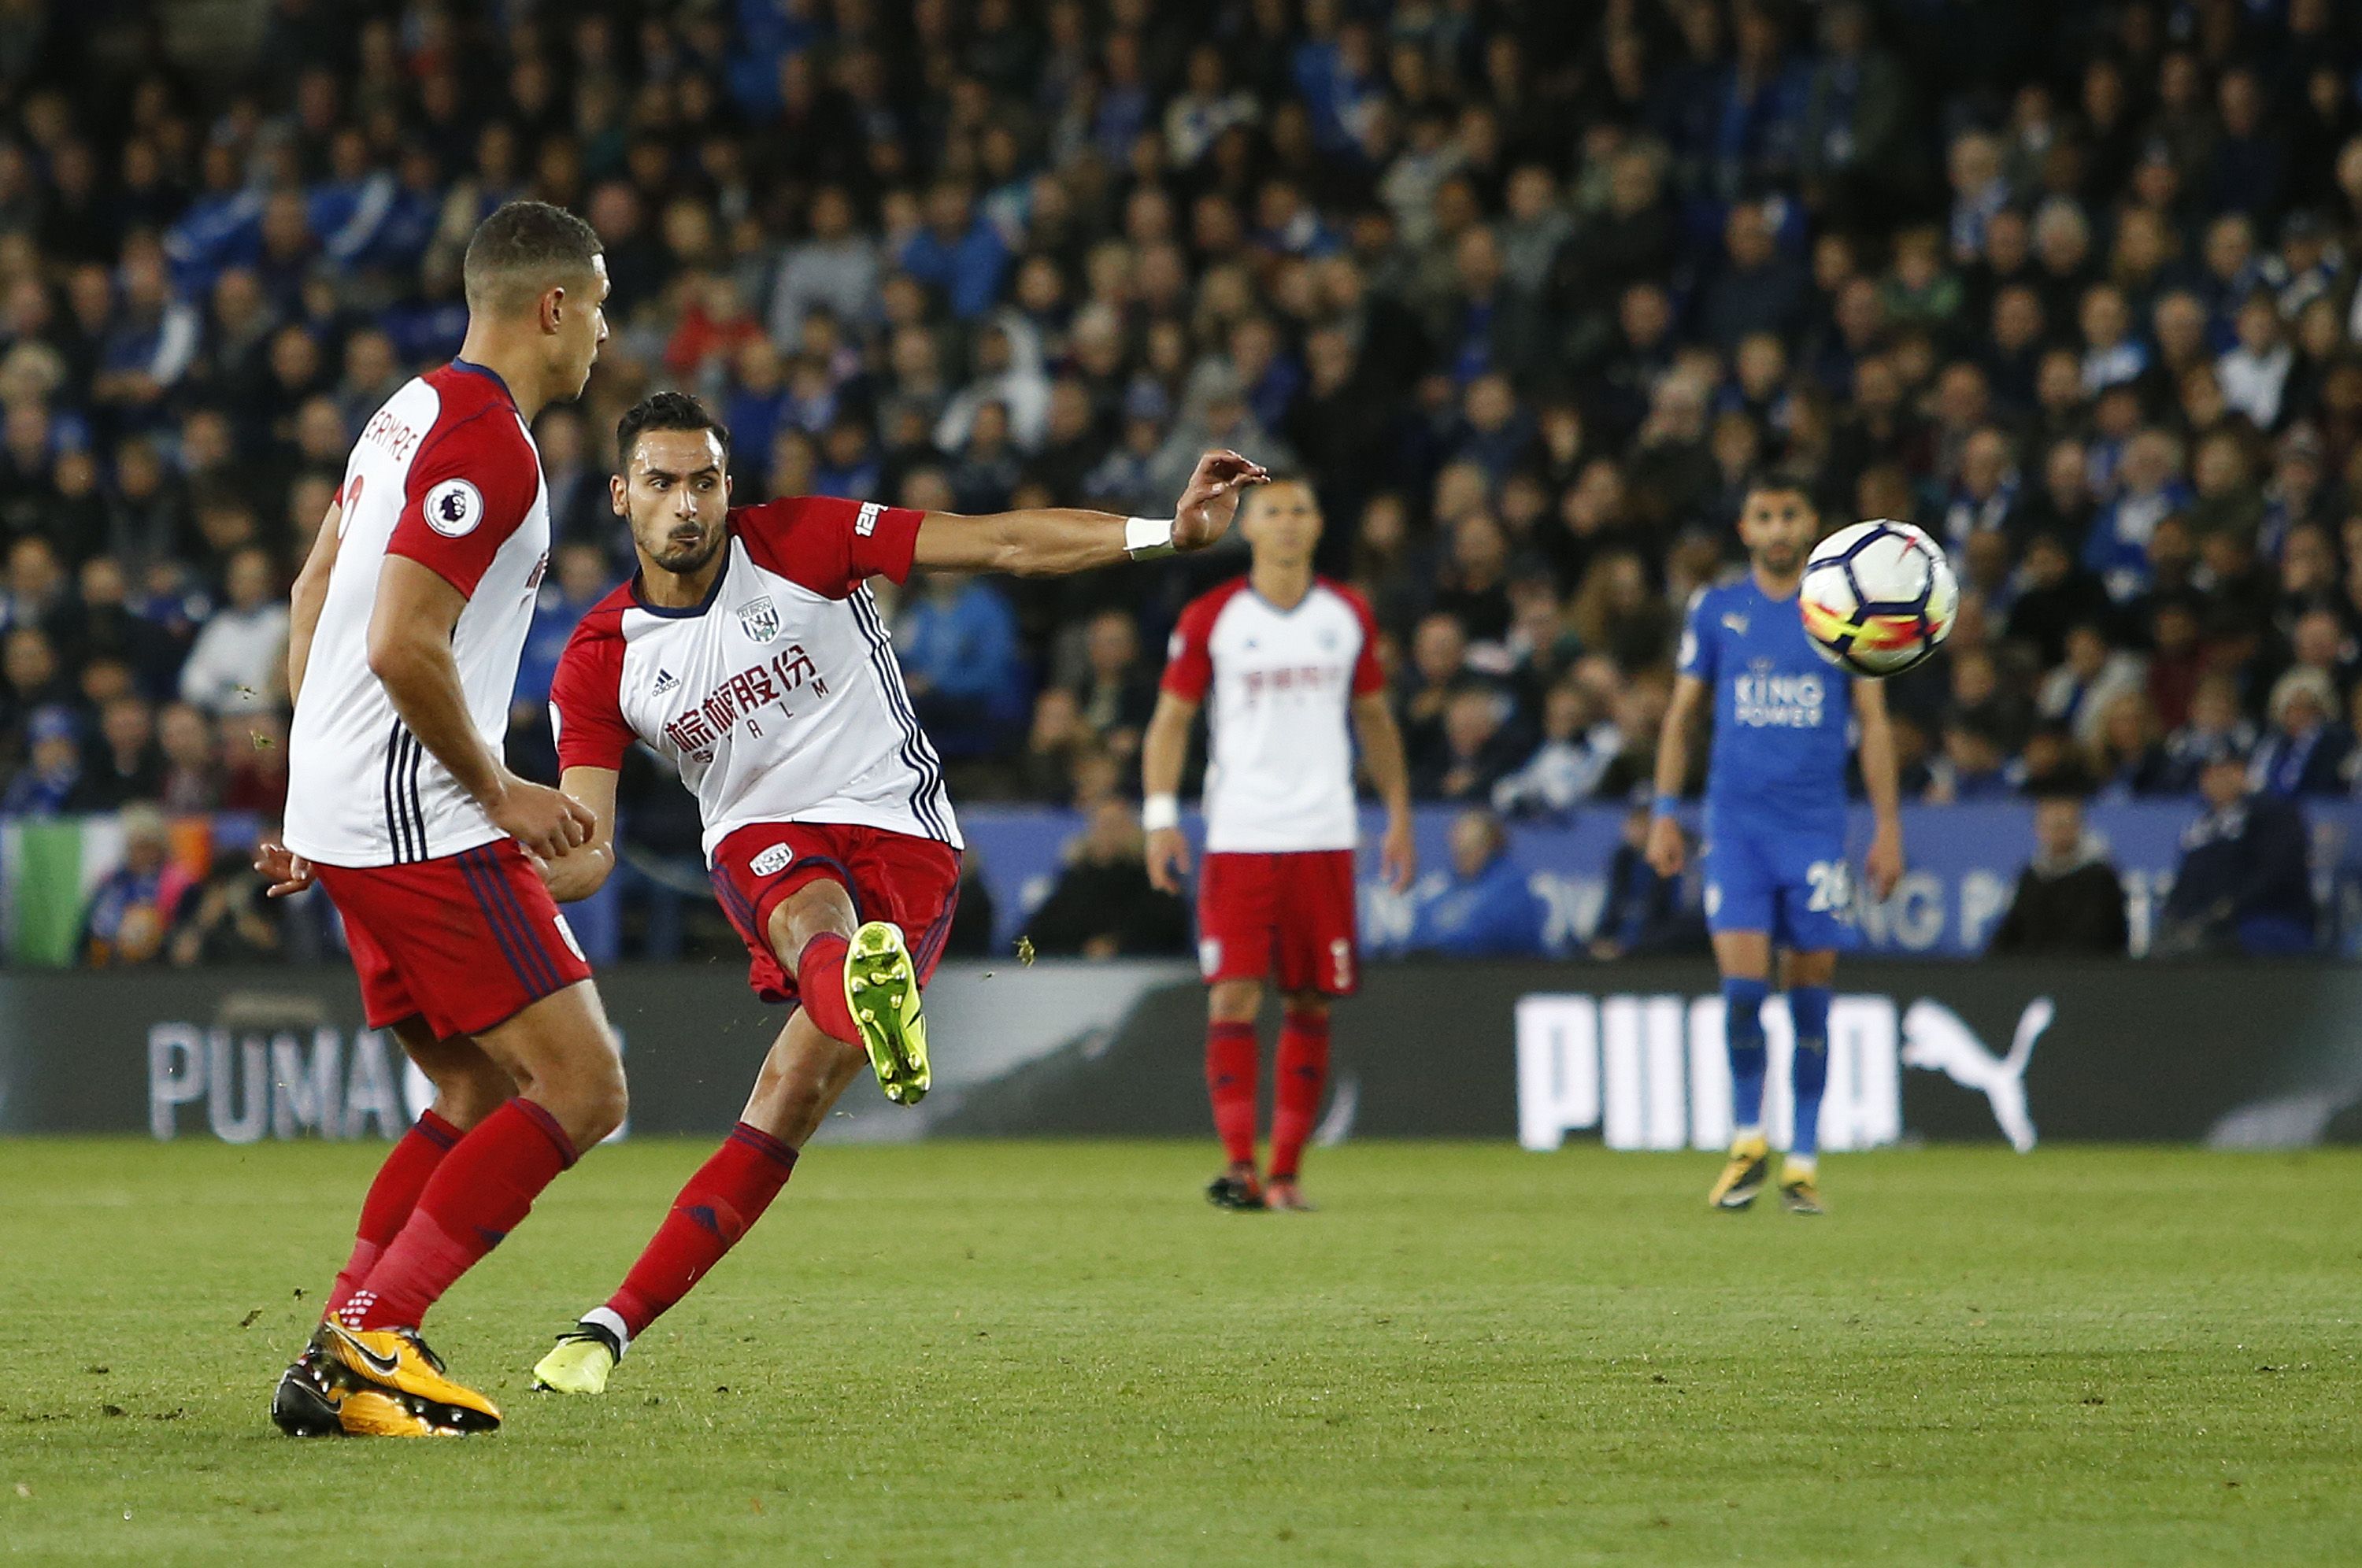 Nacer Chadli scores a free-kick against Leicester City at King Power Stadium in 2017